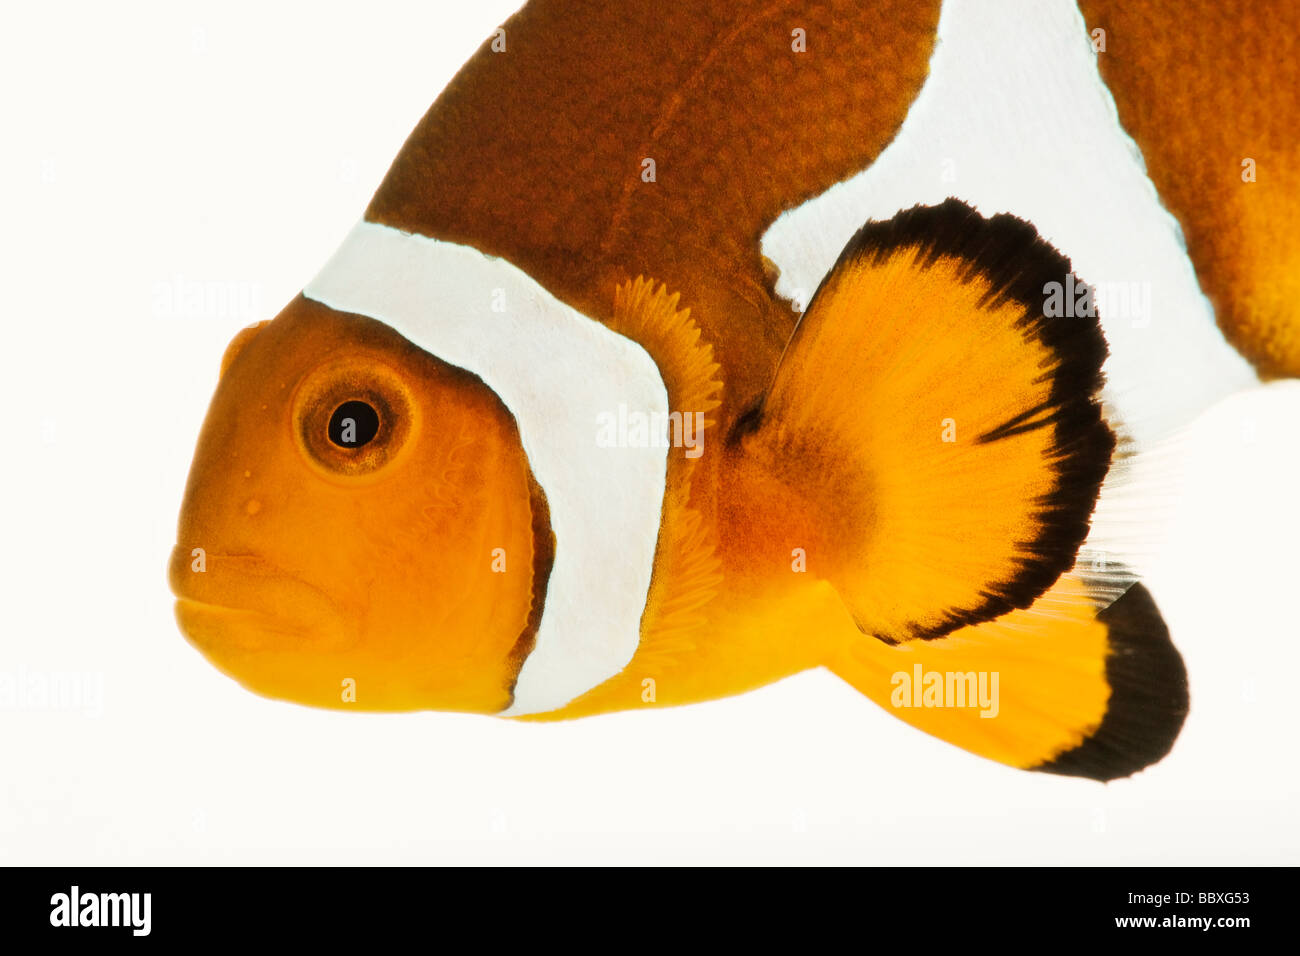 Percula Clownfish Amphiprion percula Tropical marine reef fish that use anemones as shelter and feeding ground Stock Photo